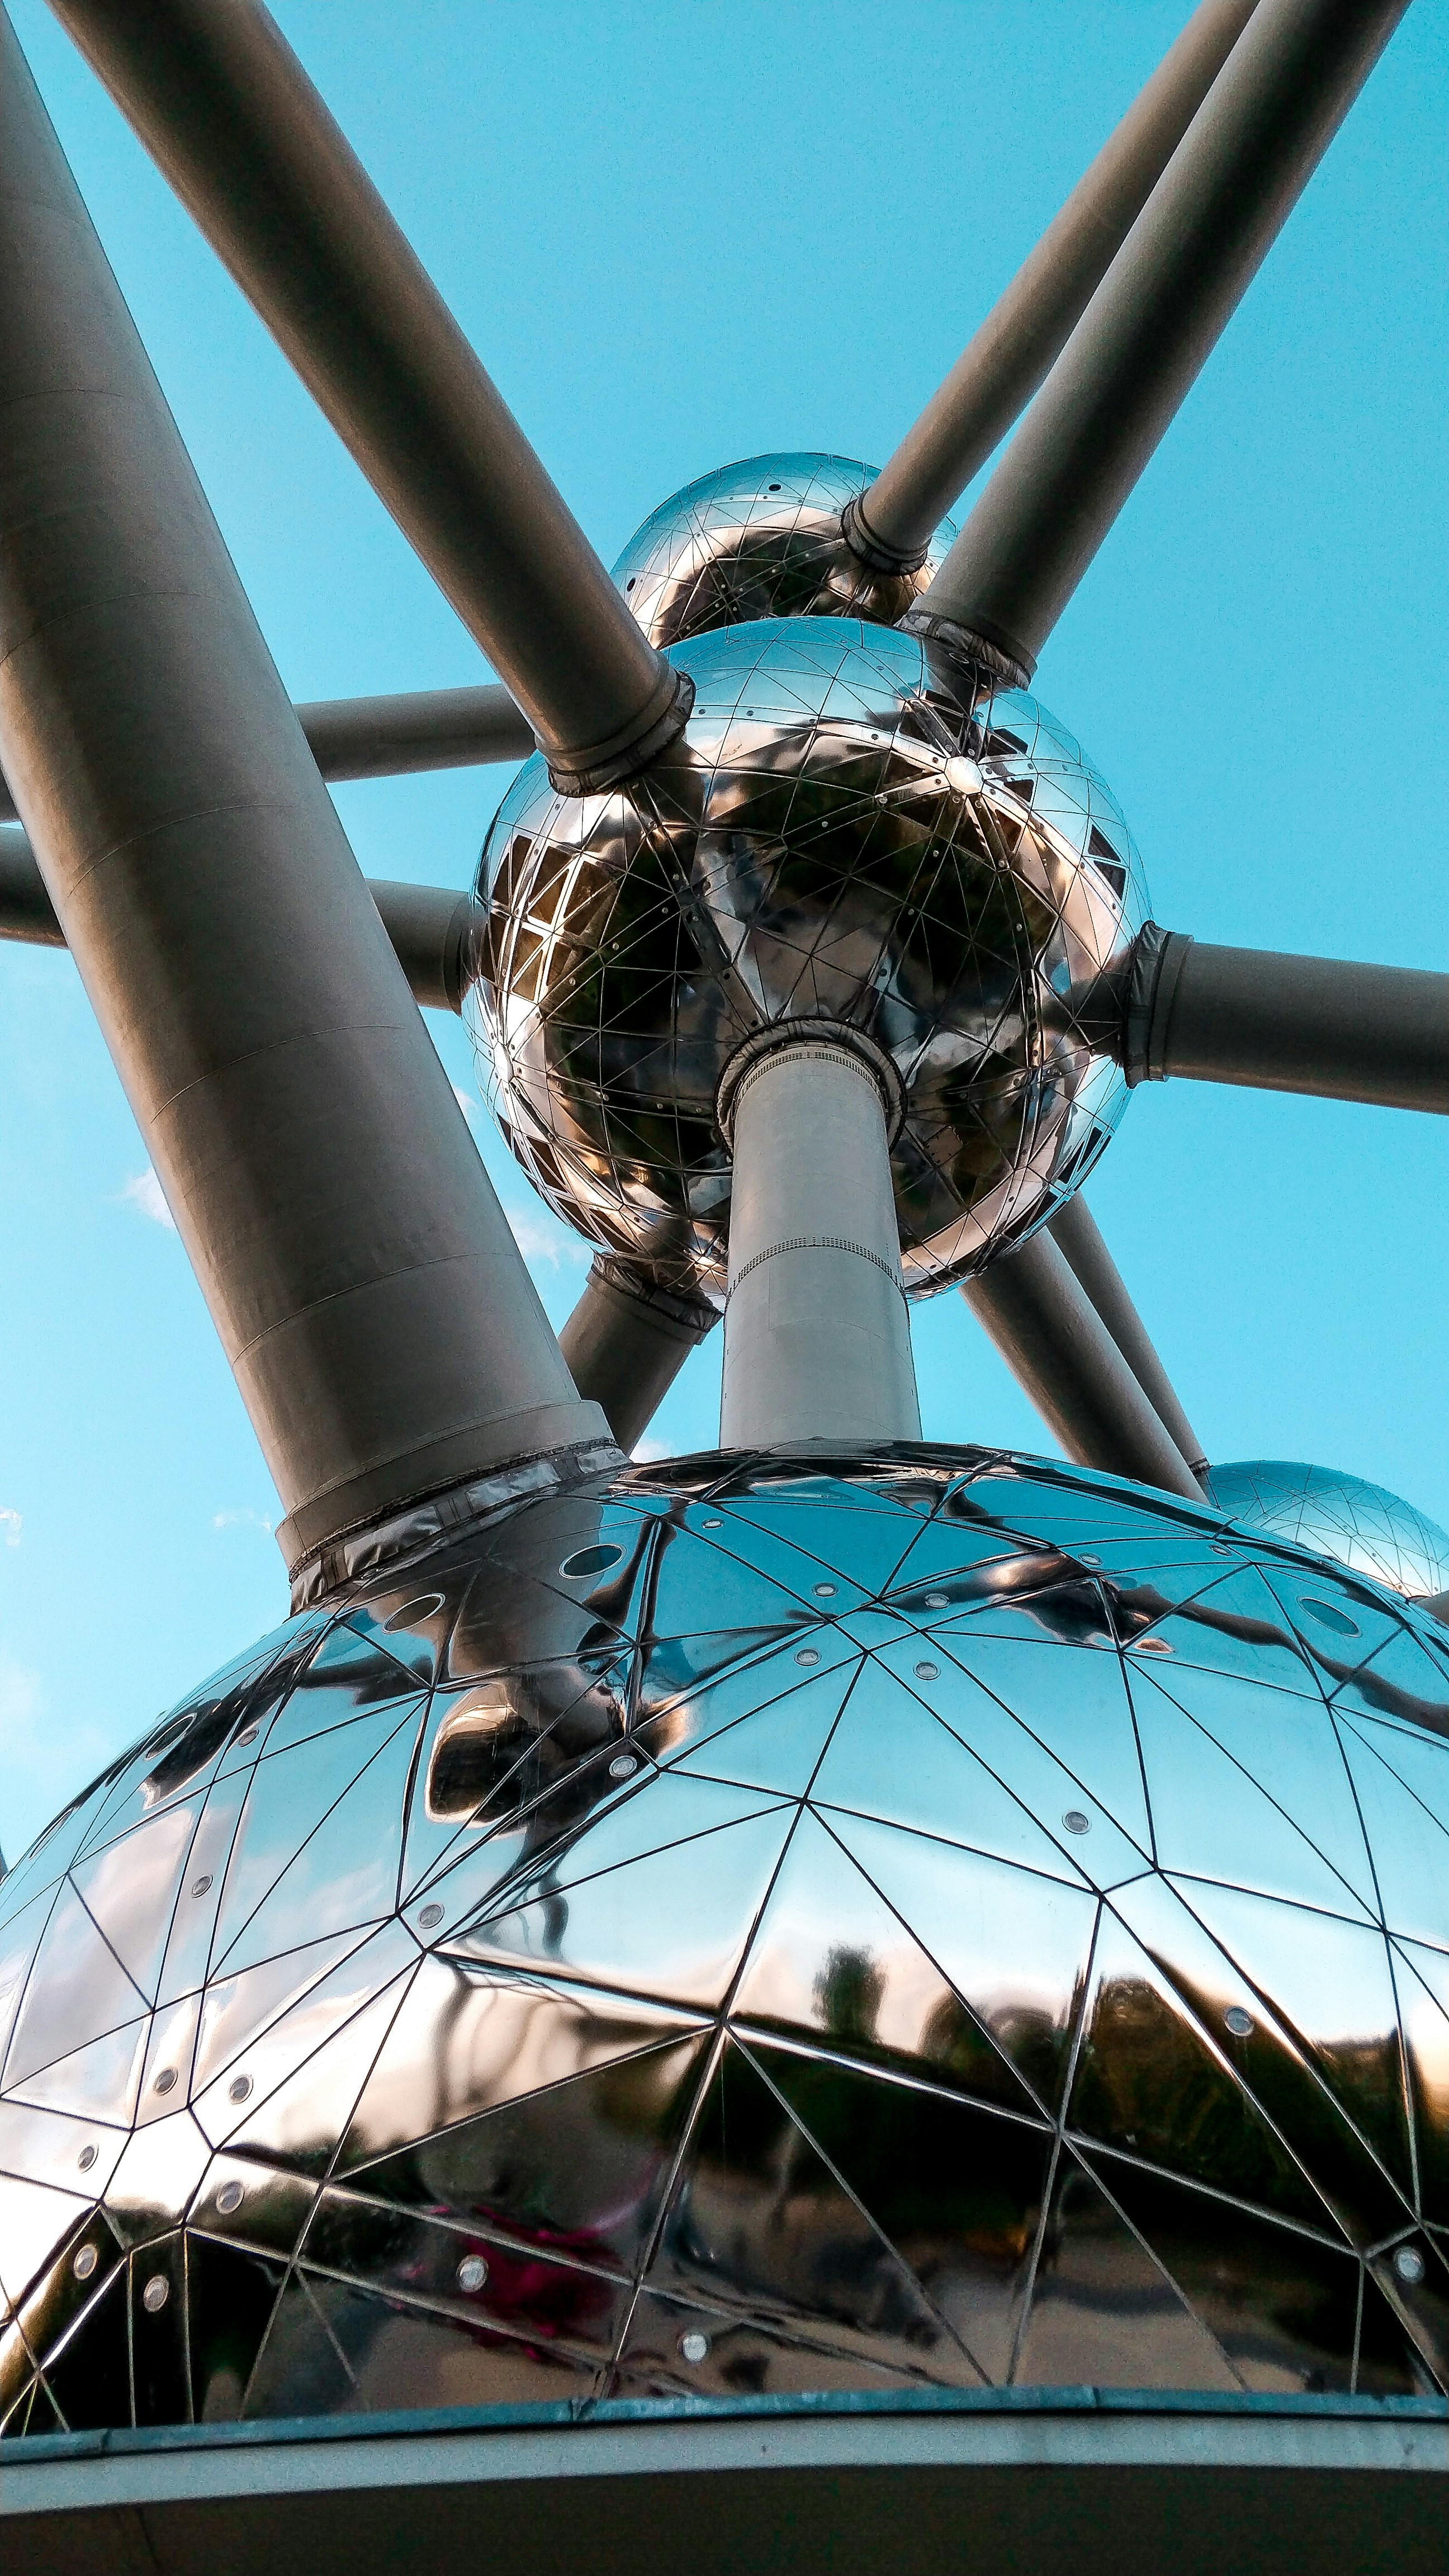 silver-colored spherical structure with attached gray pipes under blue sky